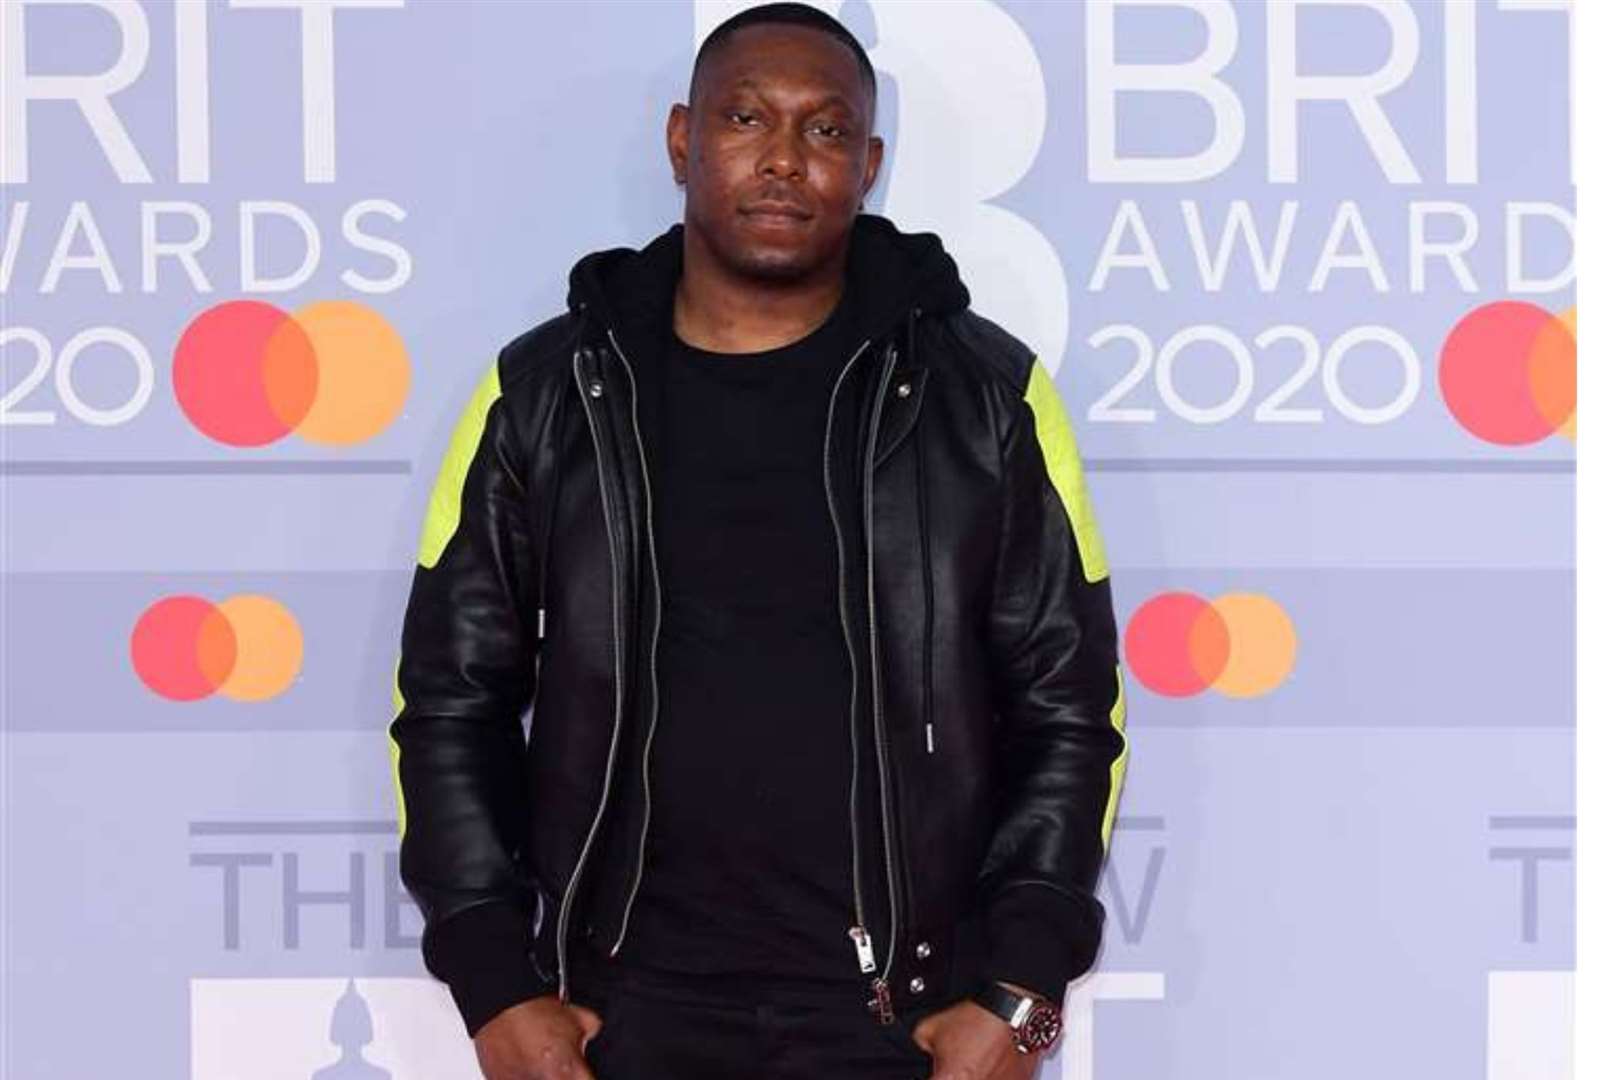 Dizzee Rascal arriving at the 2020 Brit Awards at the O2 Arena in London (Ian West/PA)